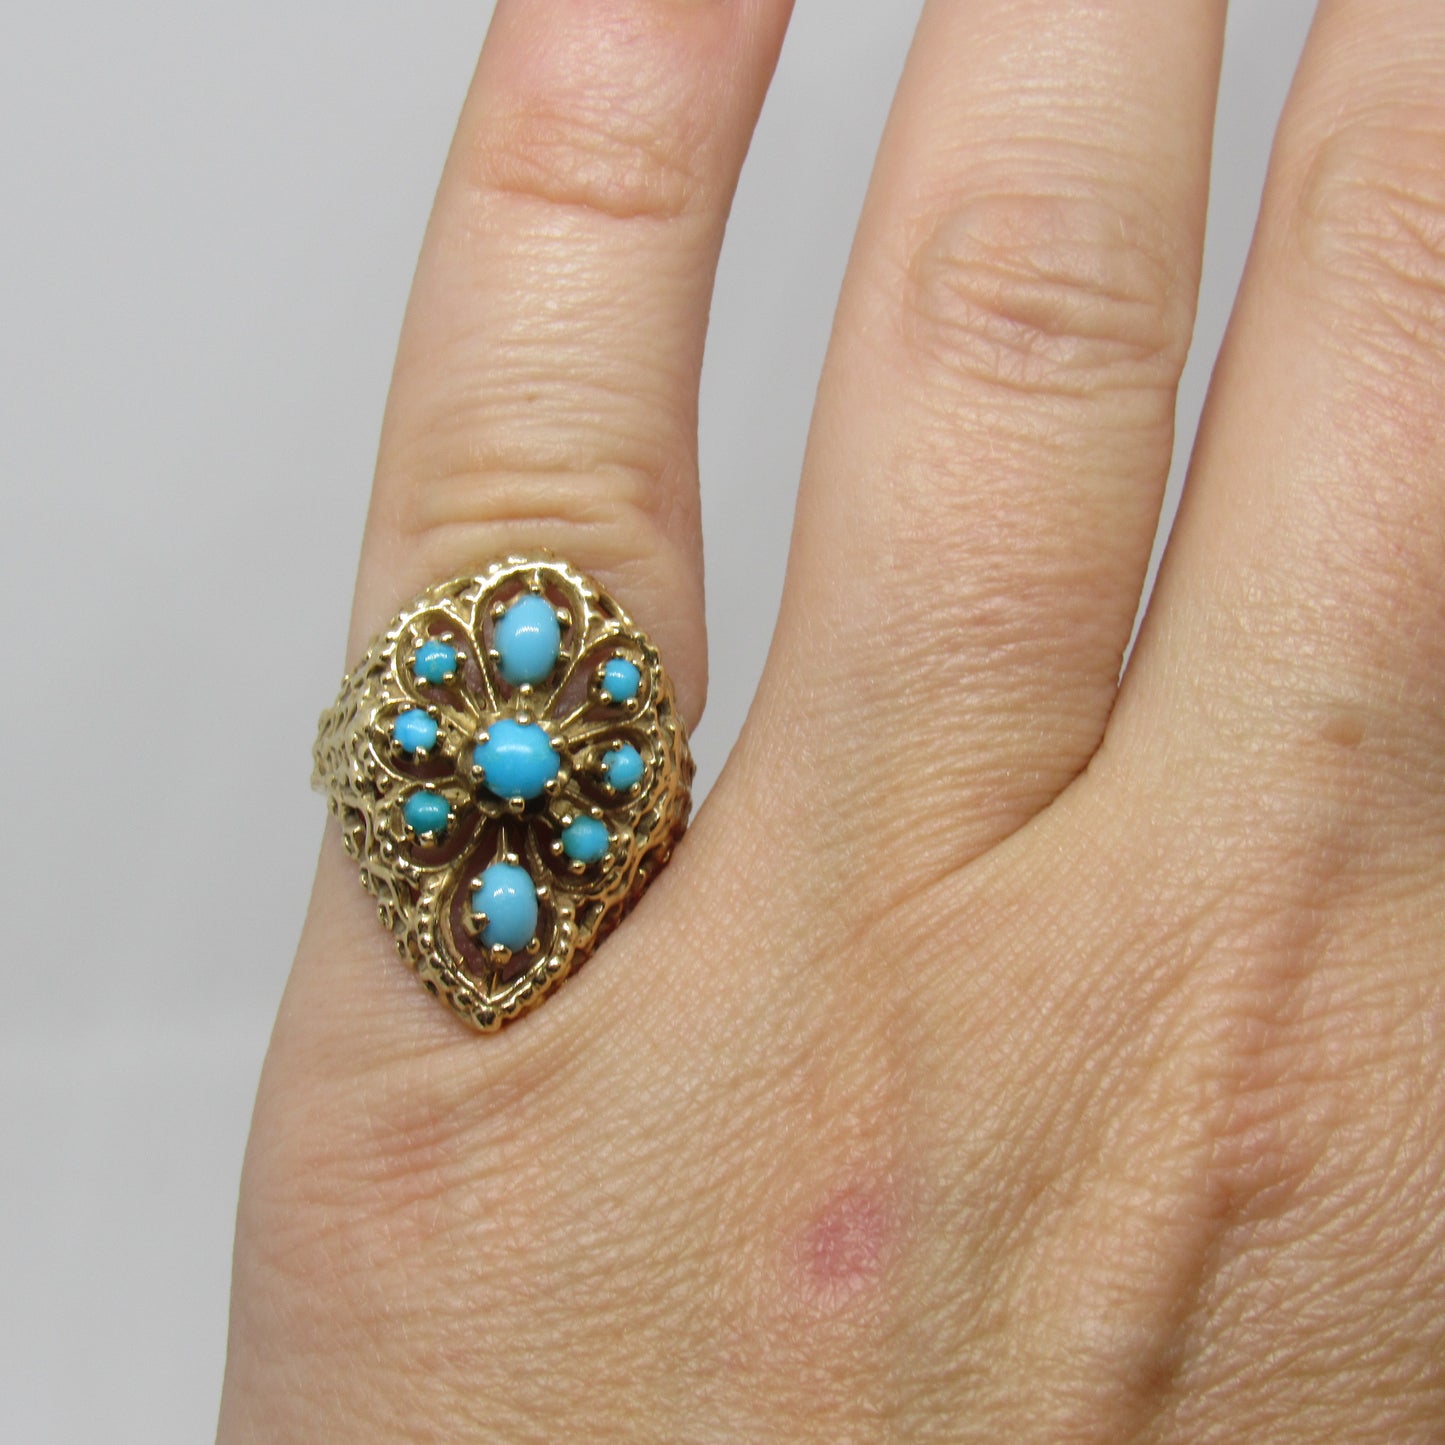 Vintage 14k Yellow Gold Turquoise Domed Openwork Statement Ring - Sz 4.75